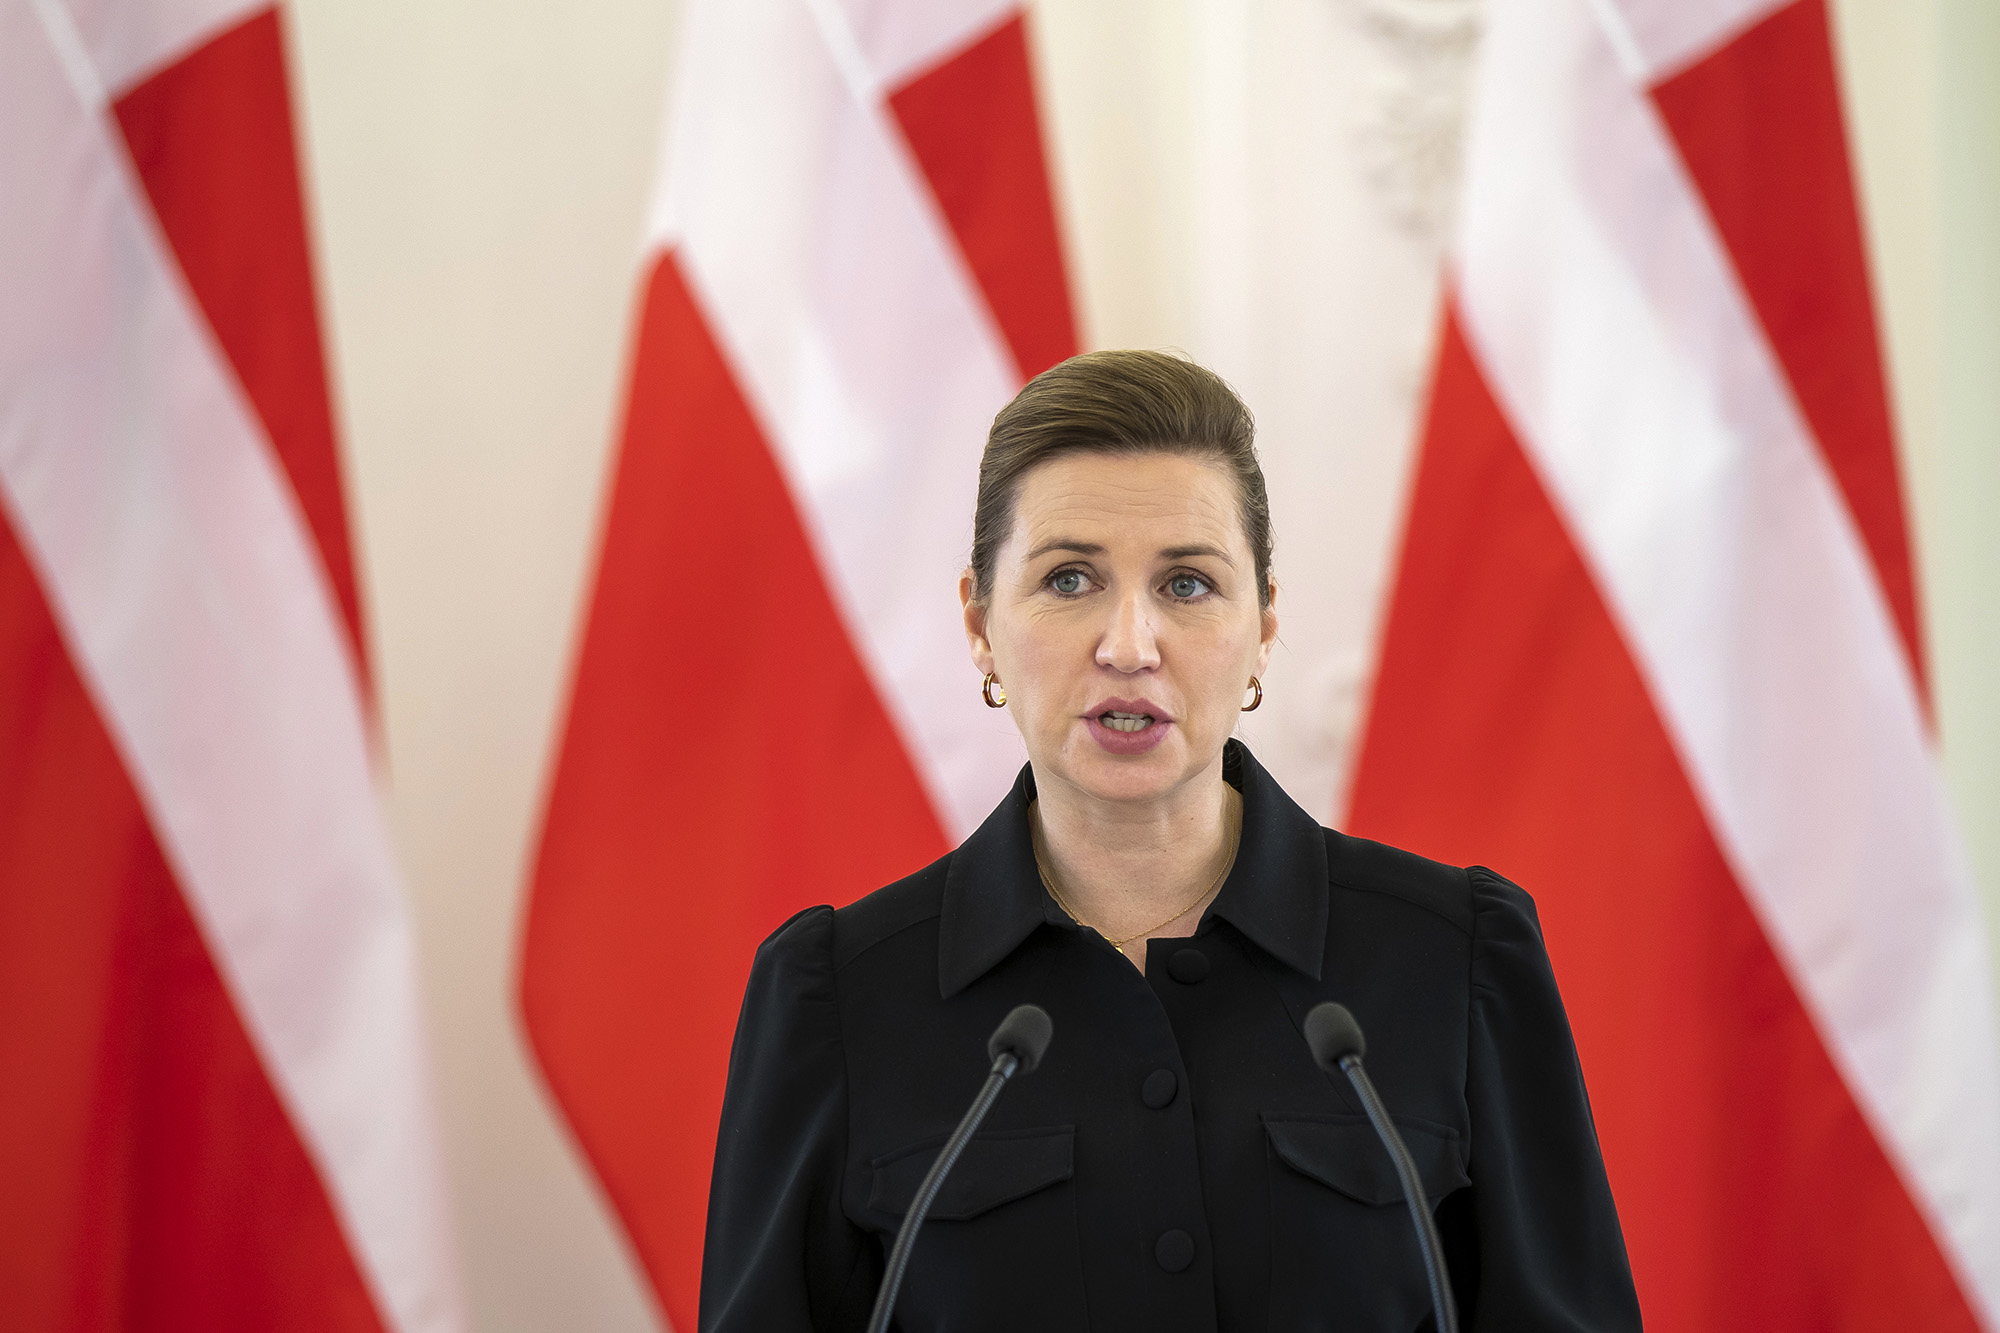 Denmark's Prime Minister Mette Frederiksen speaks during a joint media conference at the President's palace in Vilnius, Lithuania, on March 31.